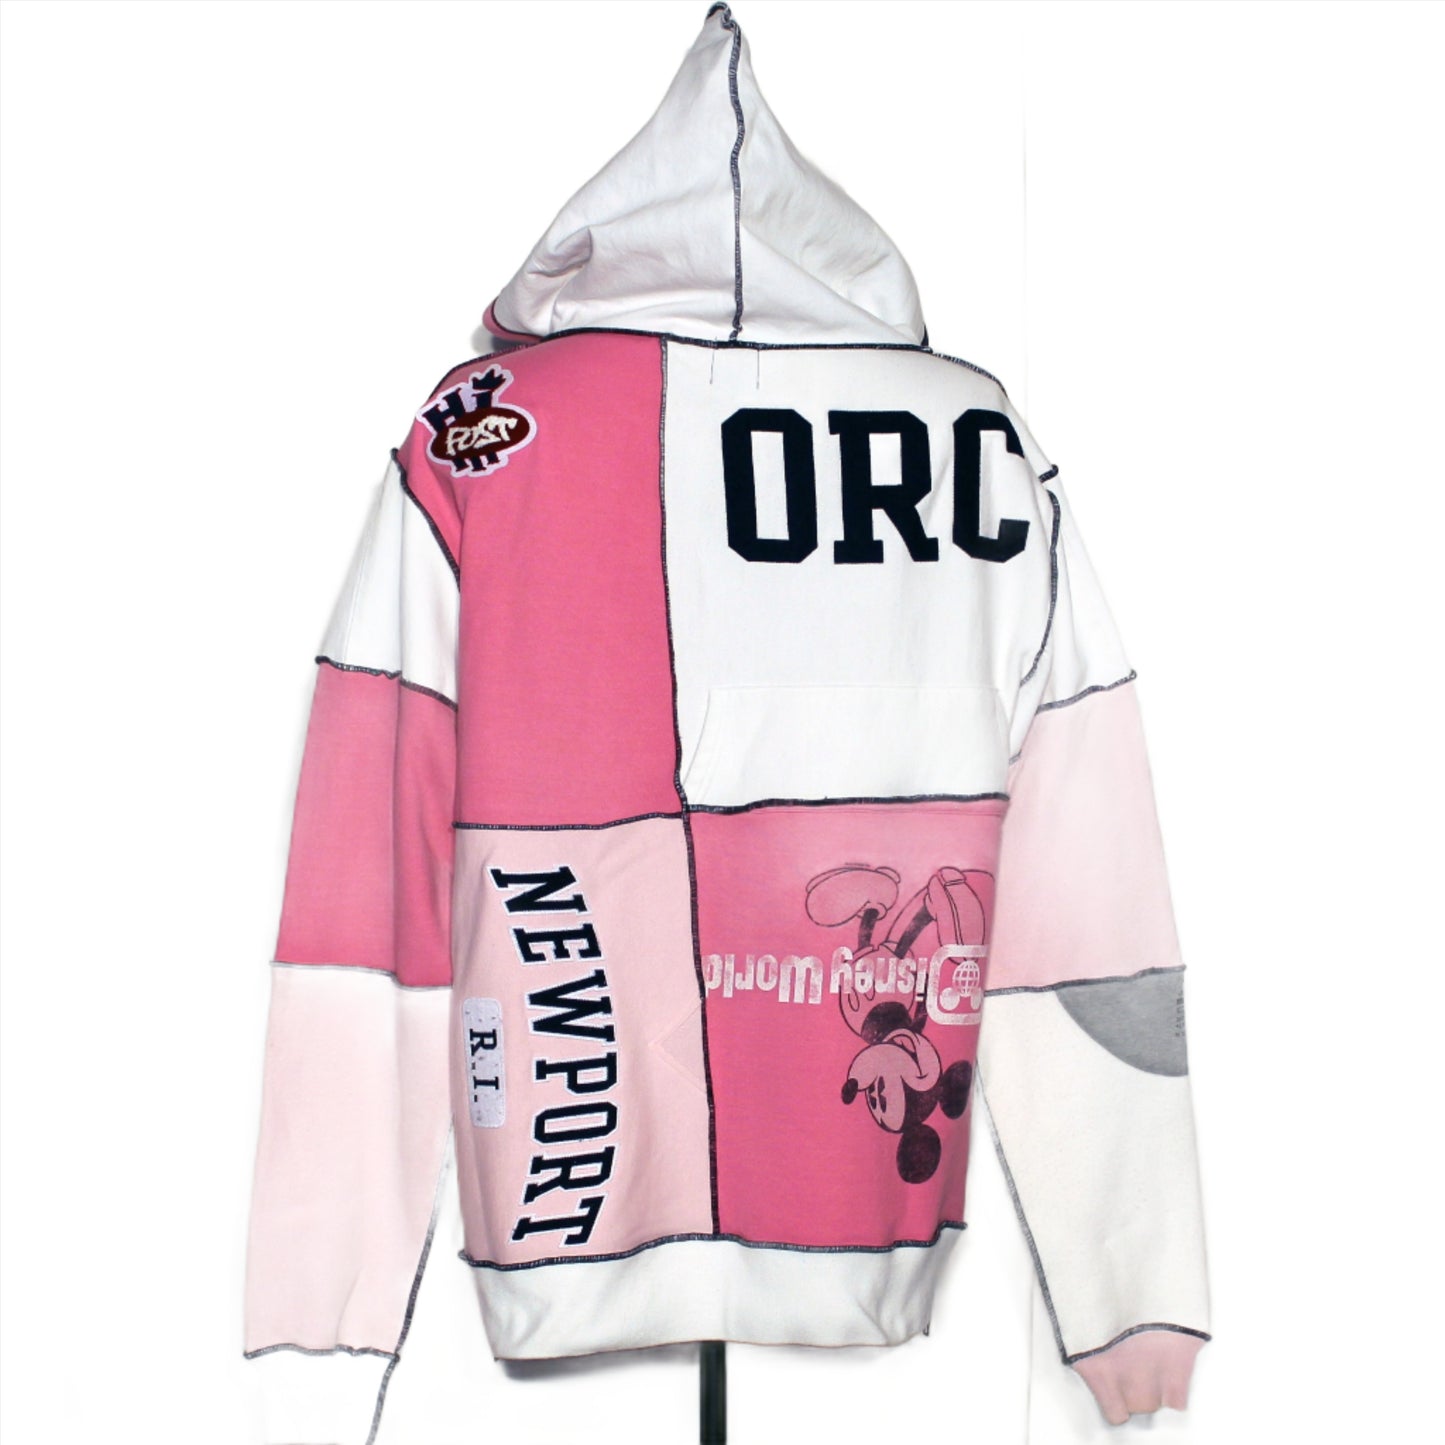 Hi Post "Mosaic" HOODED PULLOVER 1 of 1: "Pinky"